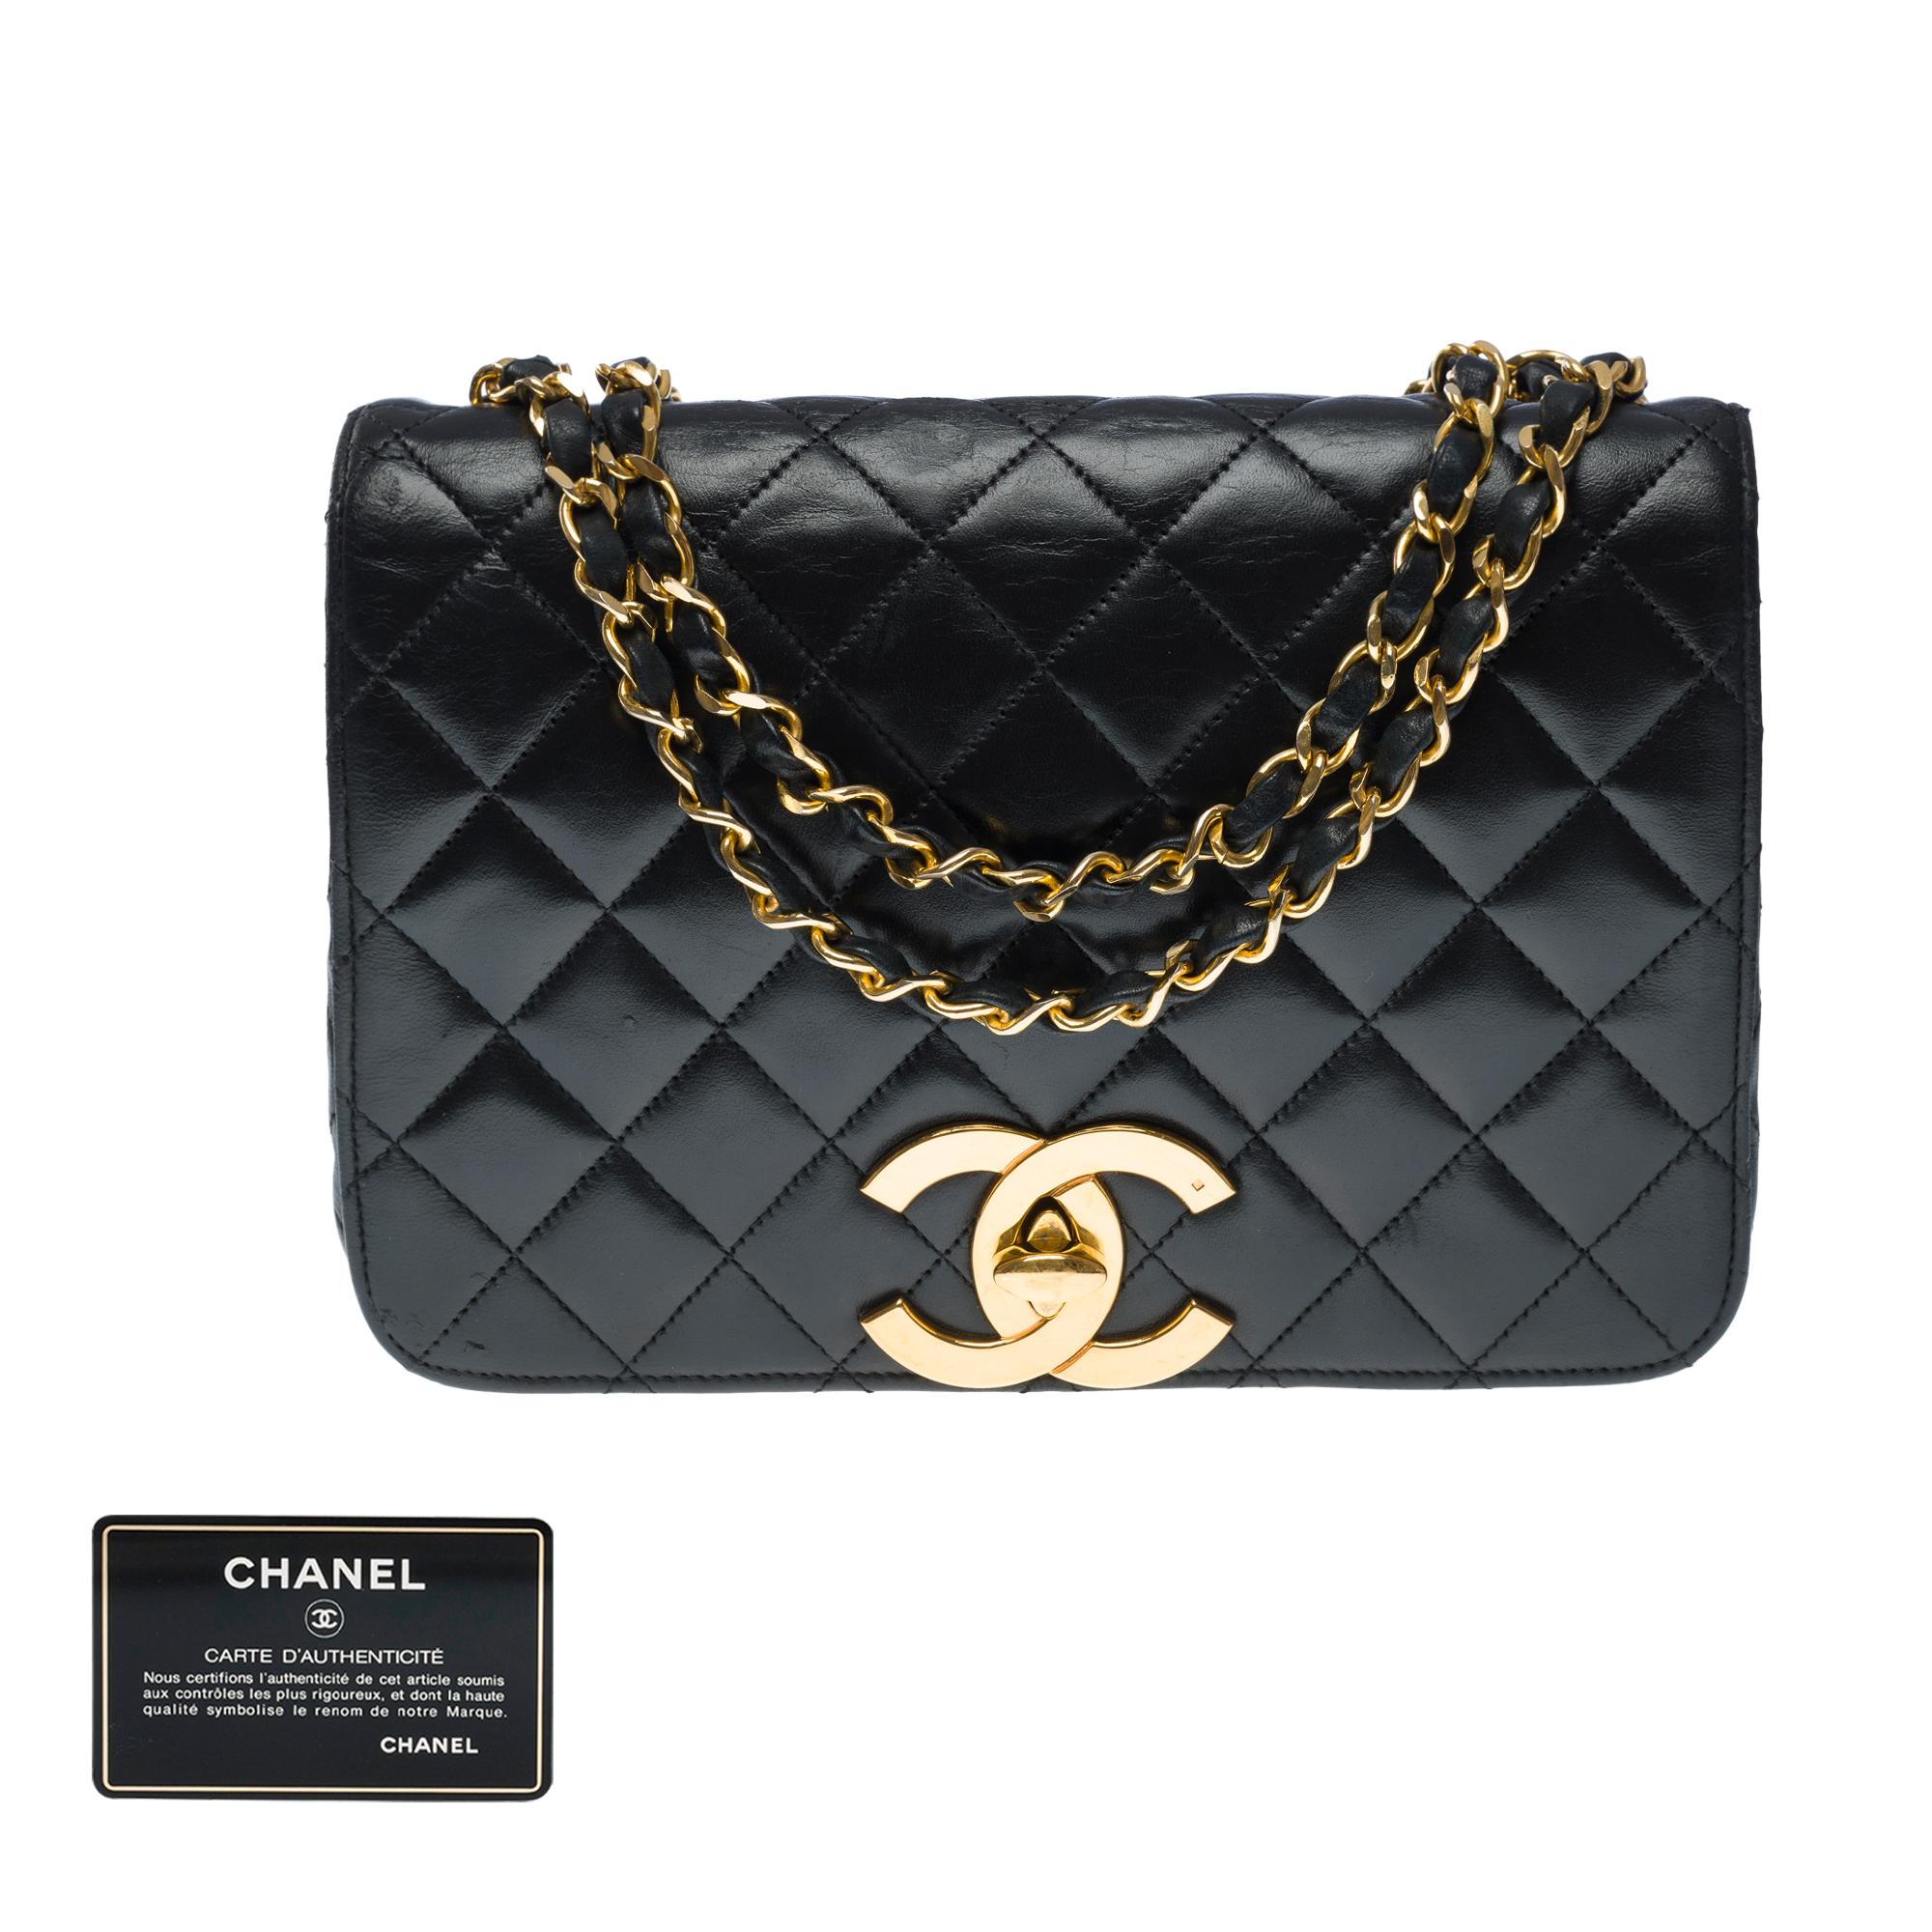 Lovely Chanel Classique Full flap shoulder bag in black quilted leather, gold metal trim, a gold metal chain handle interlaced with black leather for shoulder carry

Flap closure, golden CC logo clasp
Inner lining in burgundy leather, 1 zipped